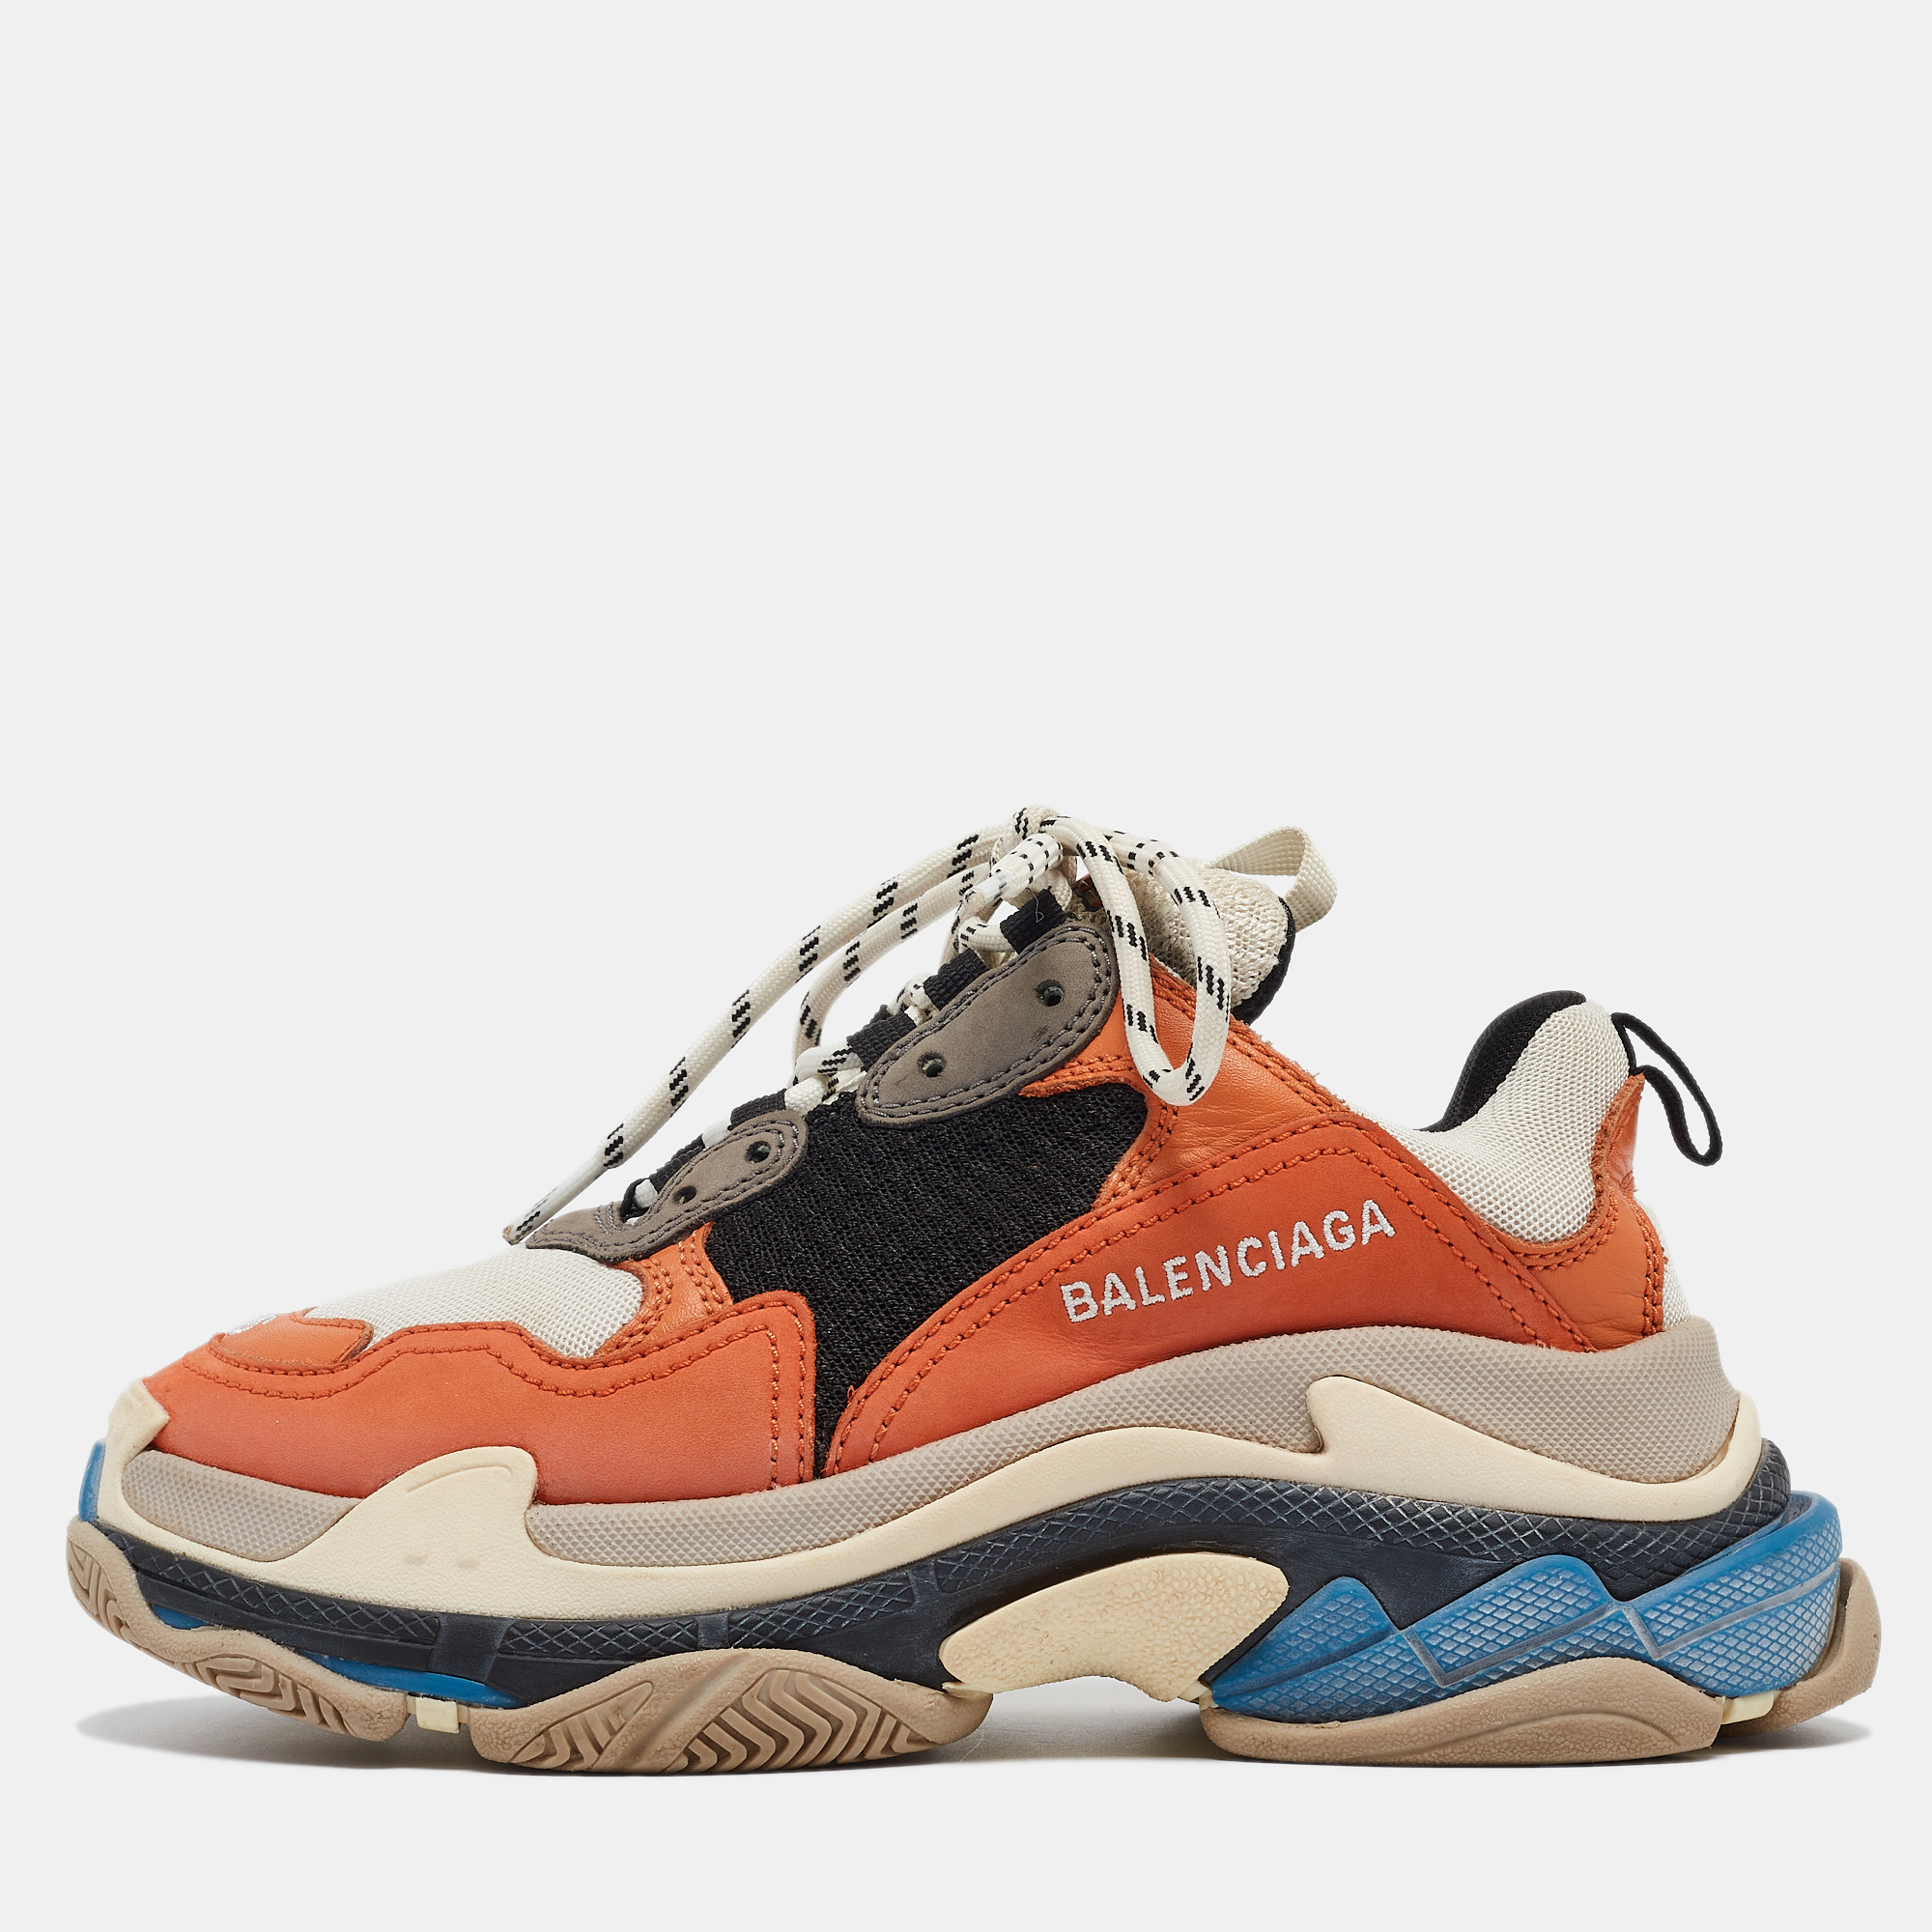 Upgrade your style with these Balenciaga sneakers. Meticulously designed for fashion and comfort theyre the ideal choice for a trendy and comfortable stride.